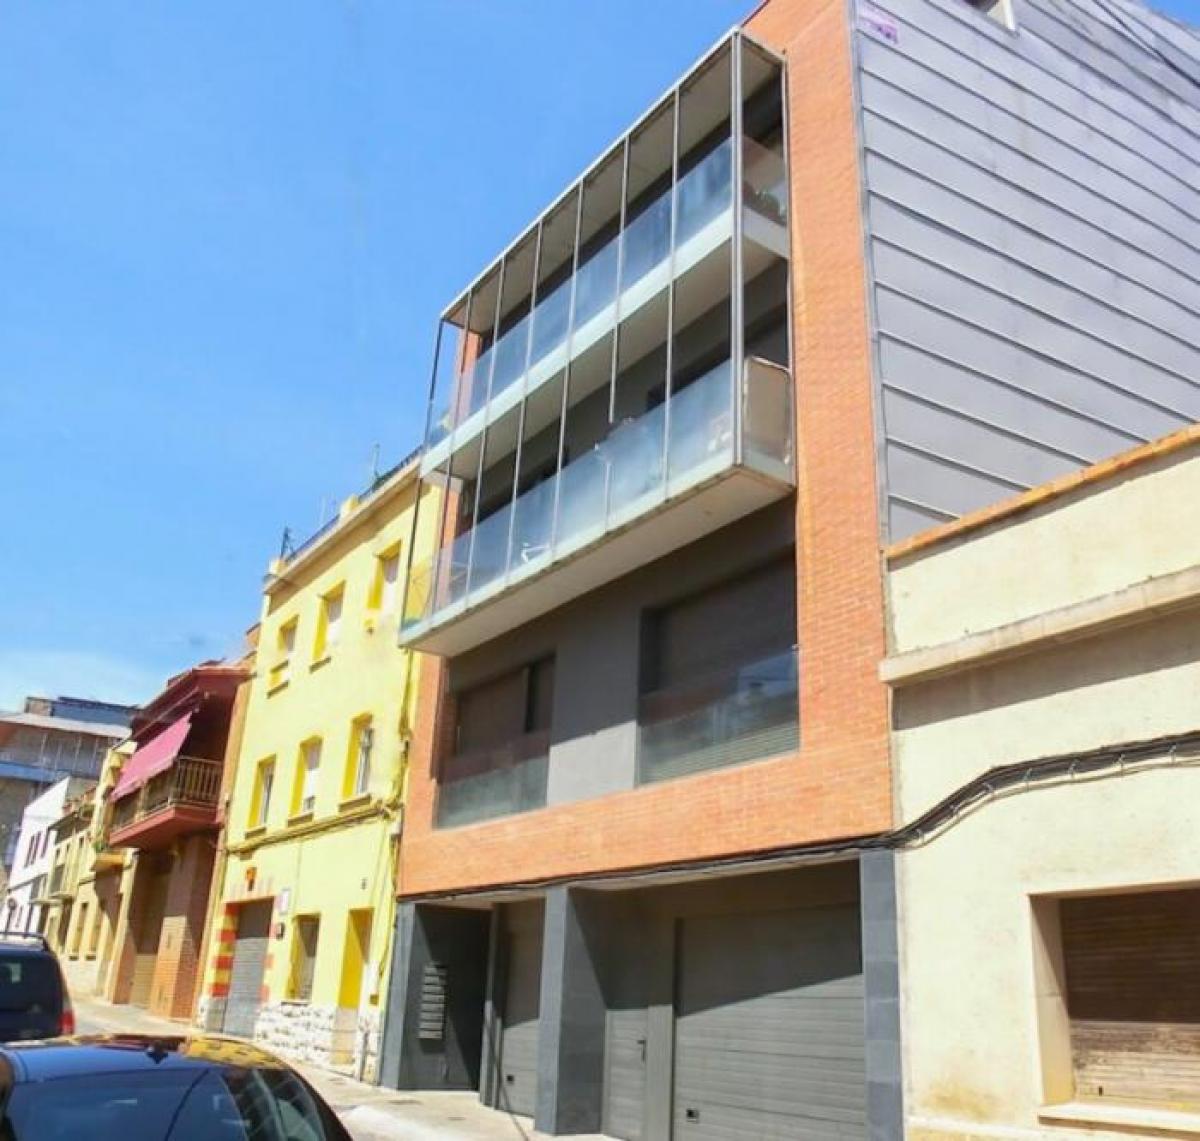 Picture of Office For Sale in Figueres, Girona, Spain